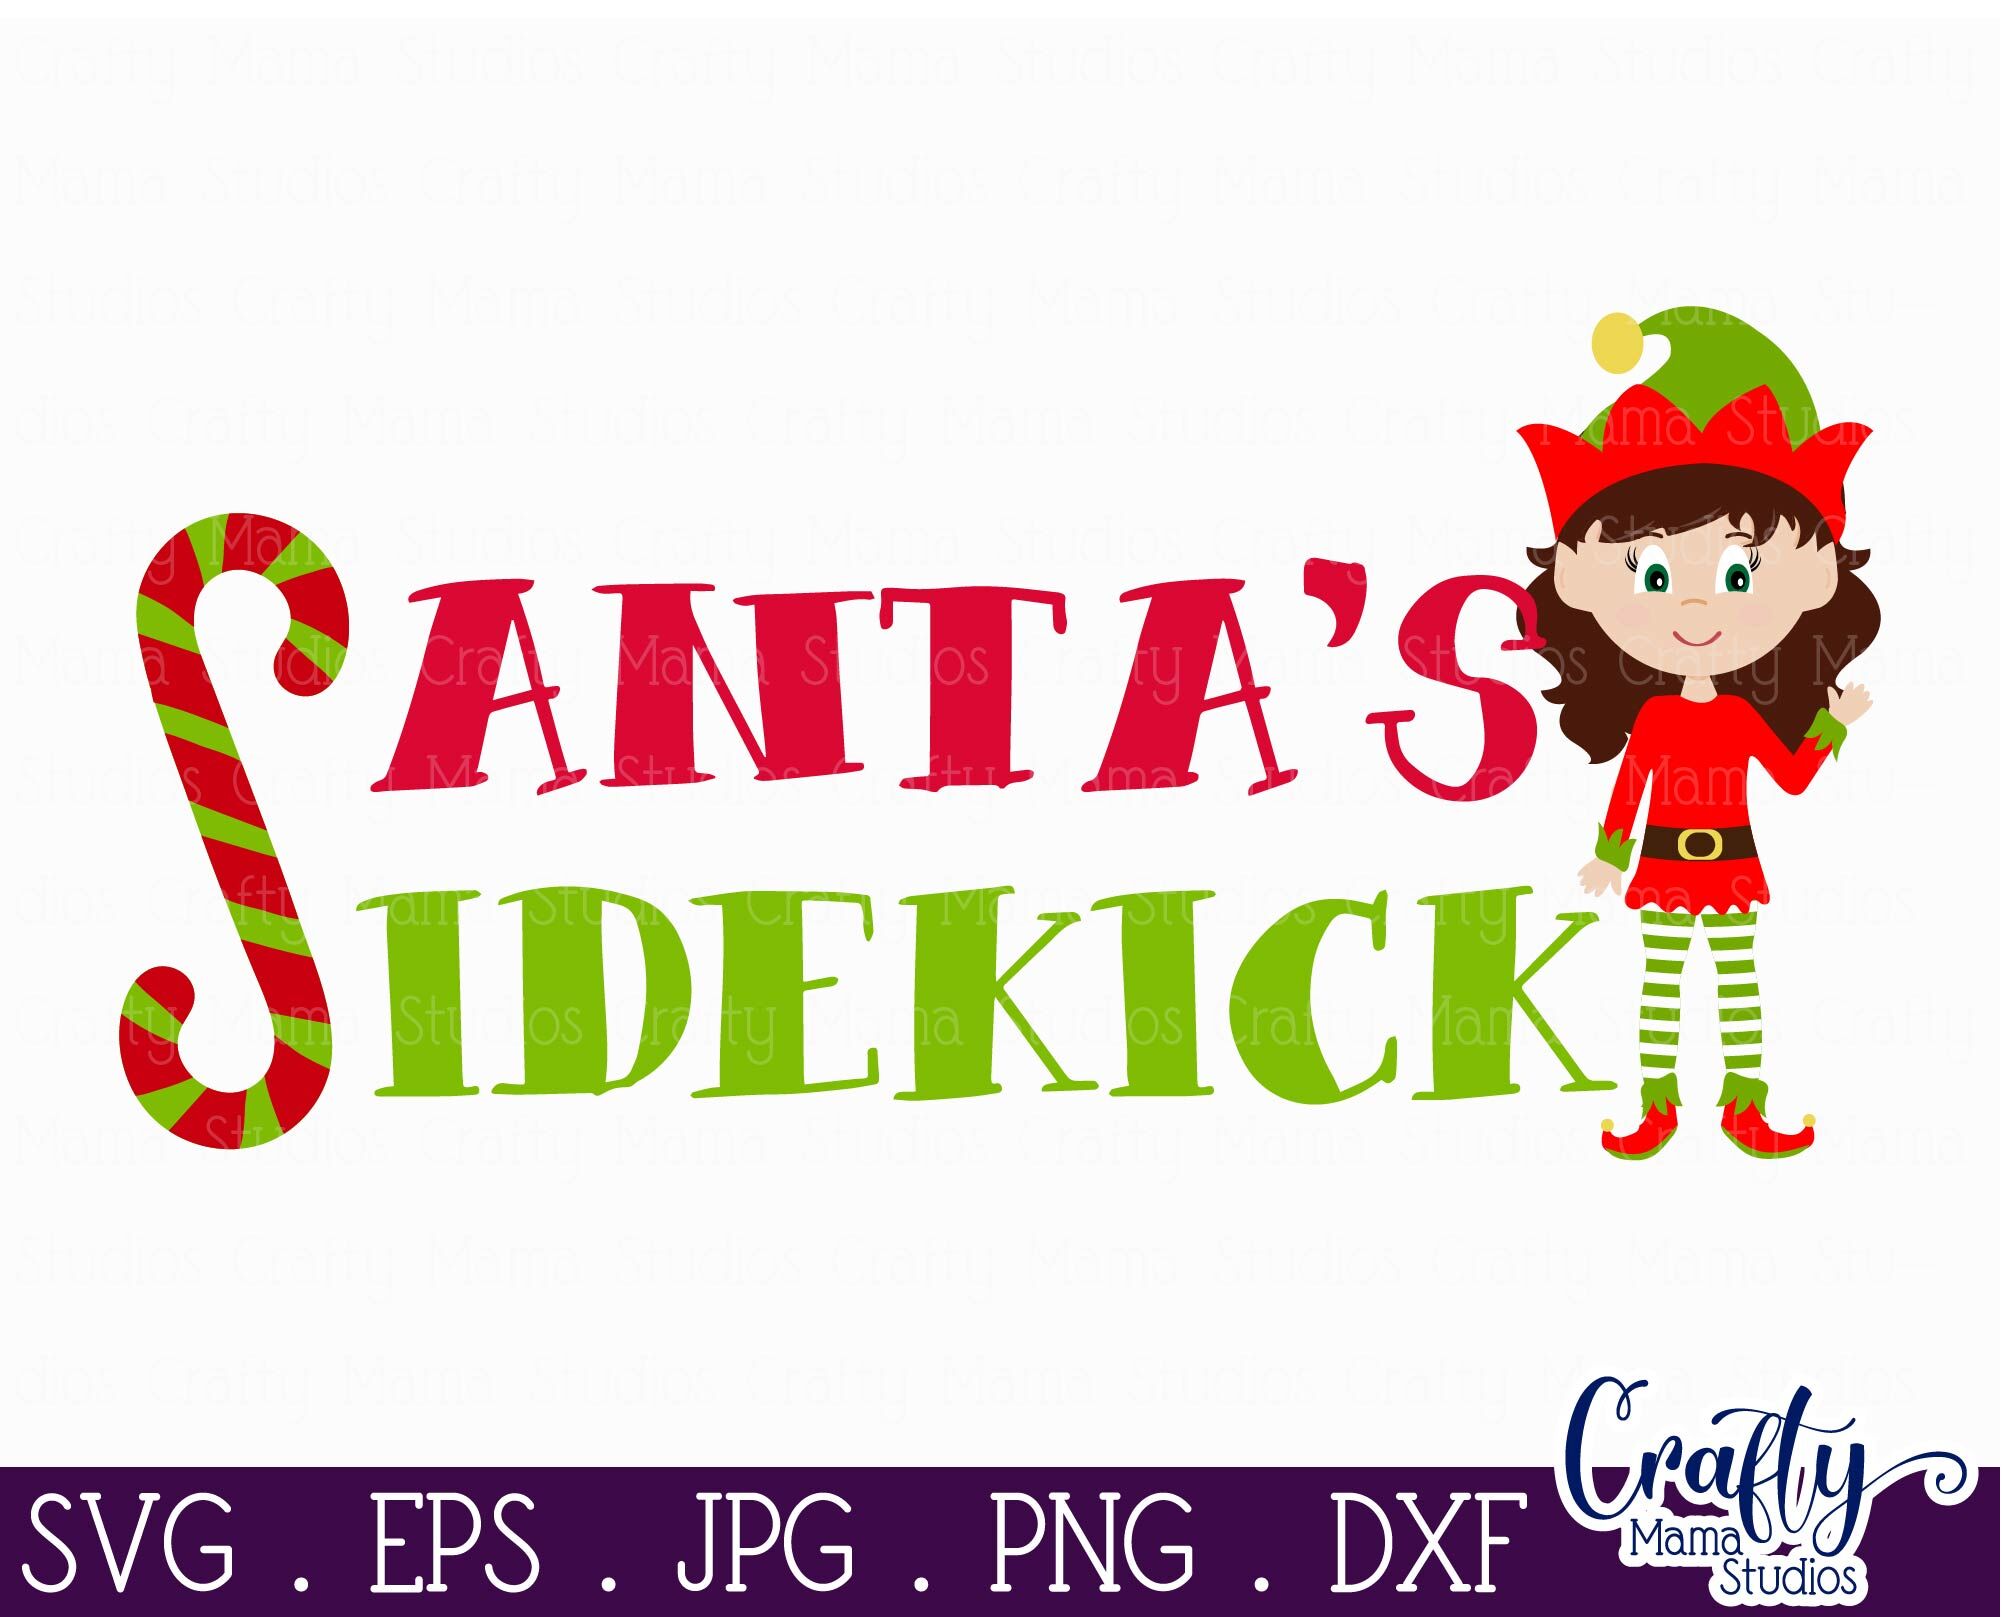 Download 21 Christmas Squad Svg Dxf Png Etsy Get Christmas Squad Svg Background SVG Cut Files